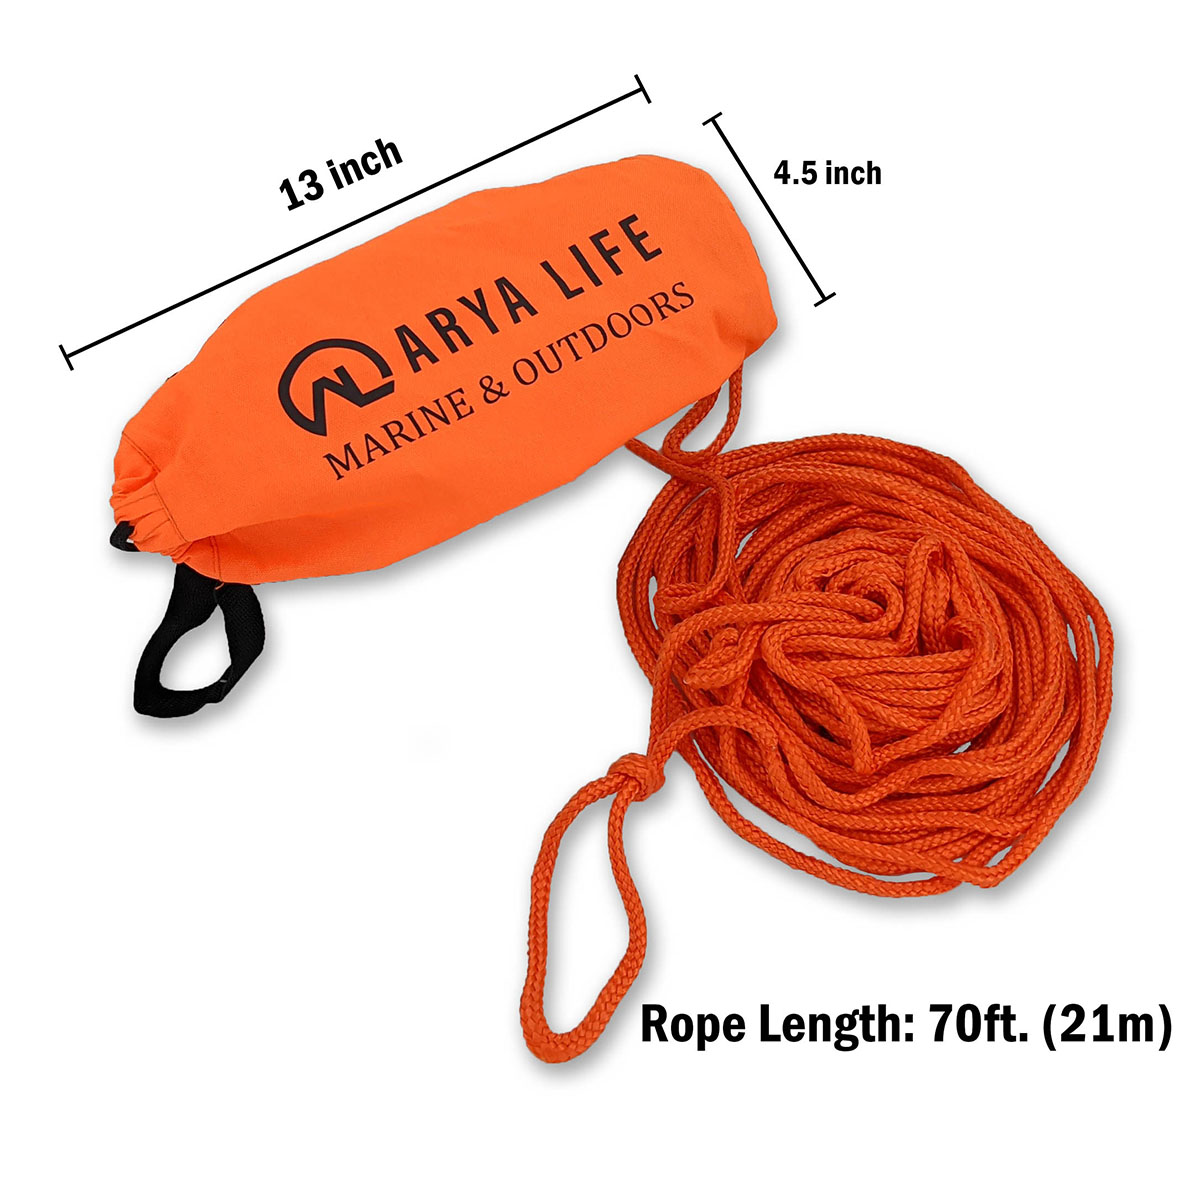 Arya Life Throw Rope Rescue Bag with 70ft of Marine Rope